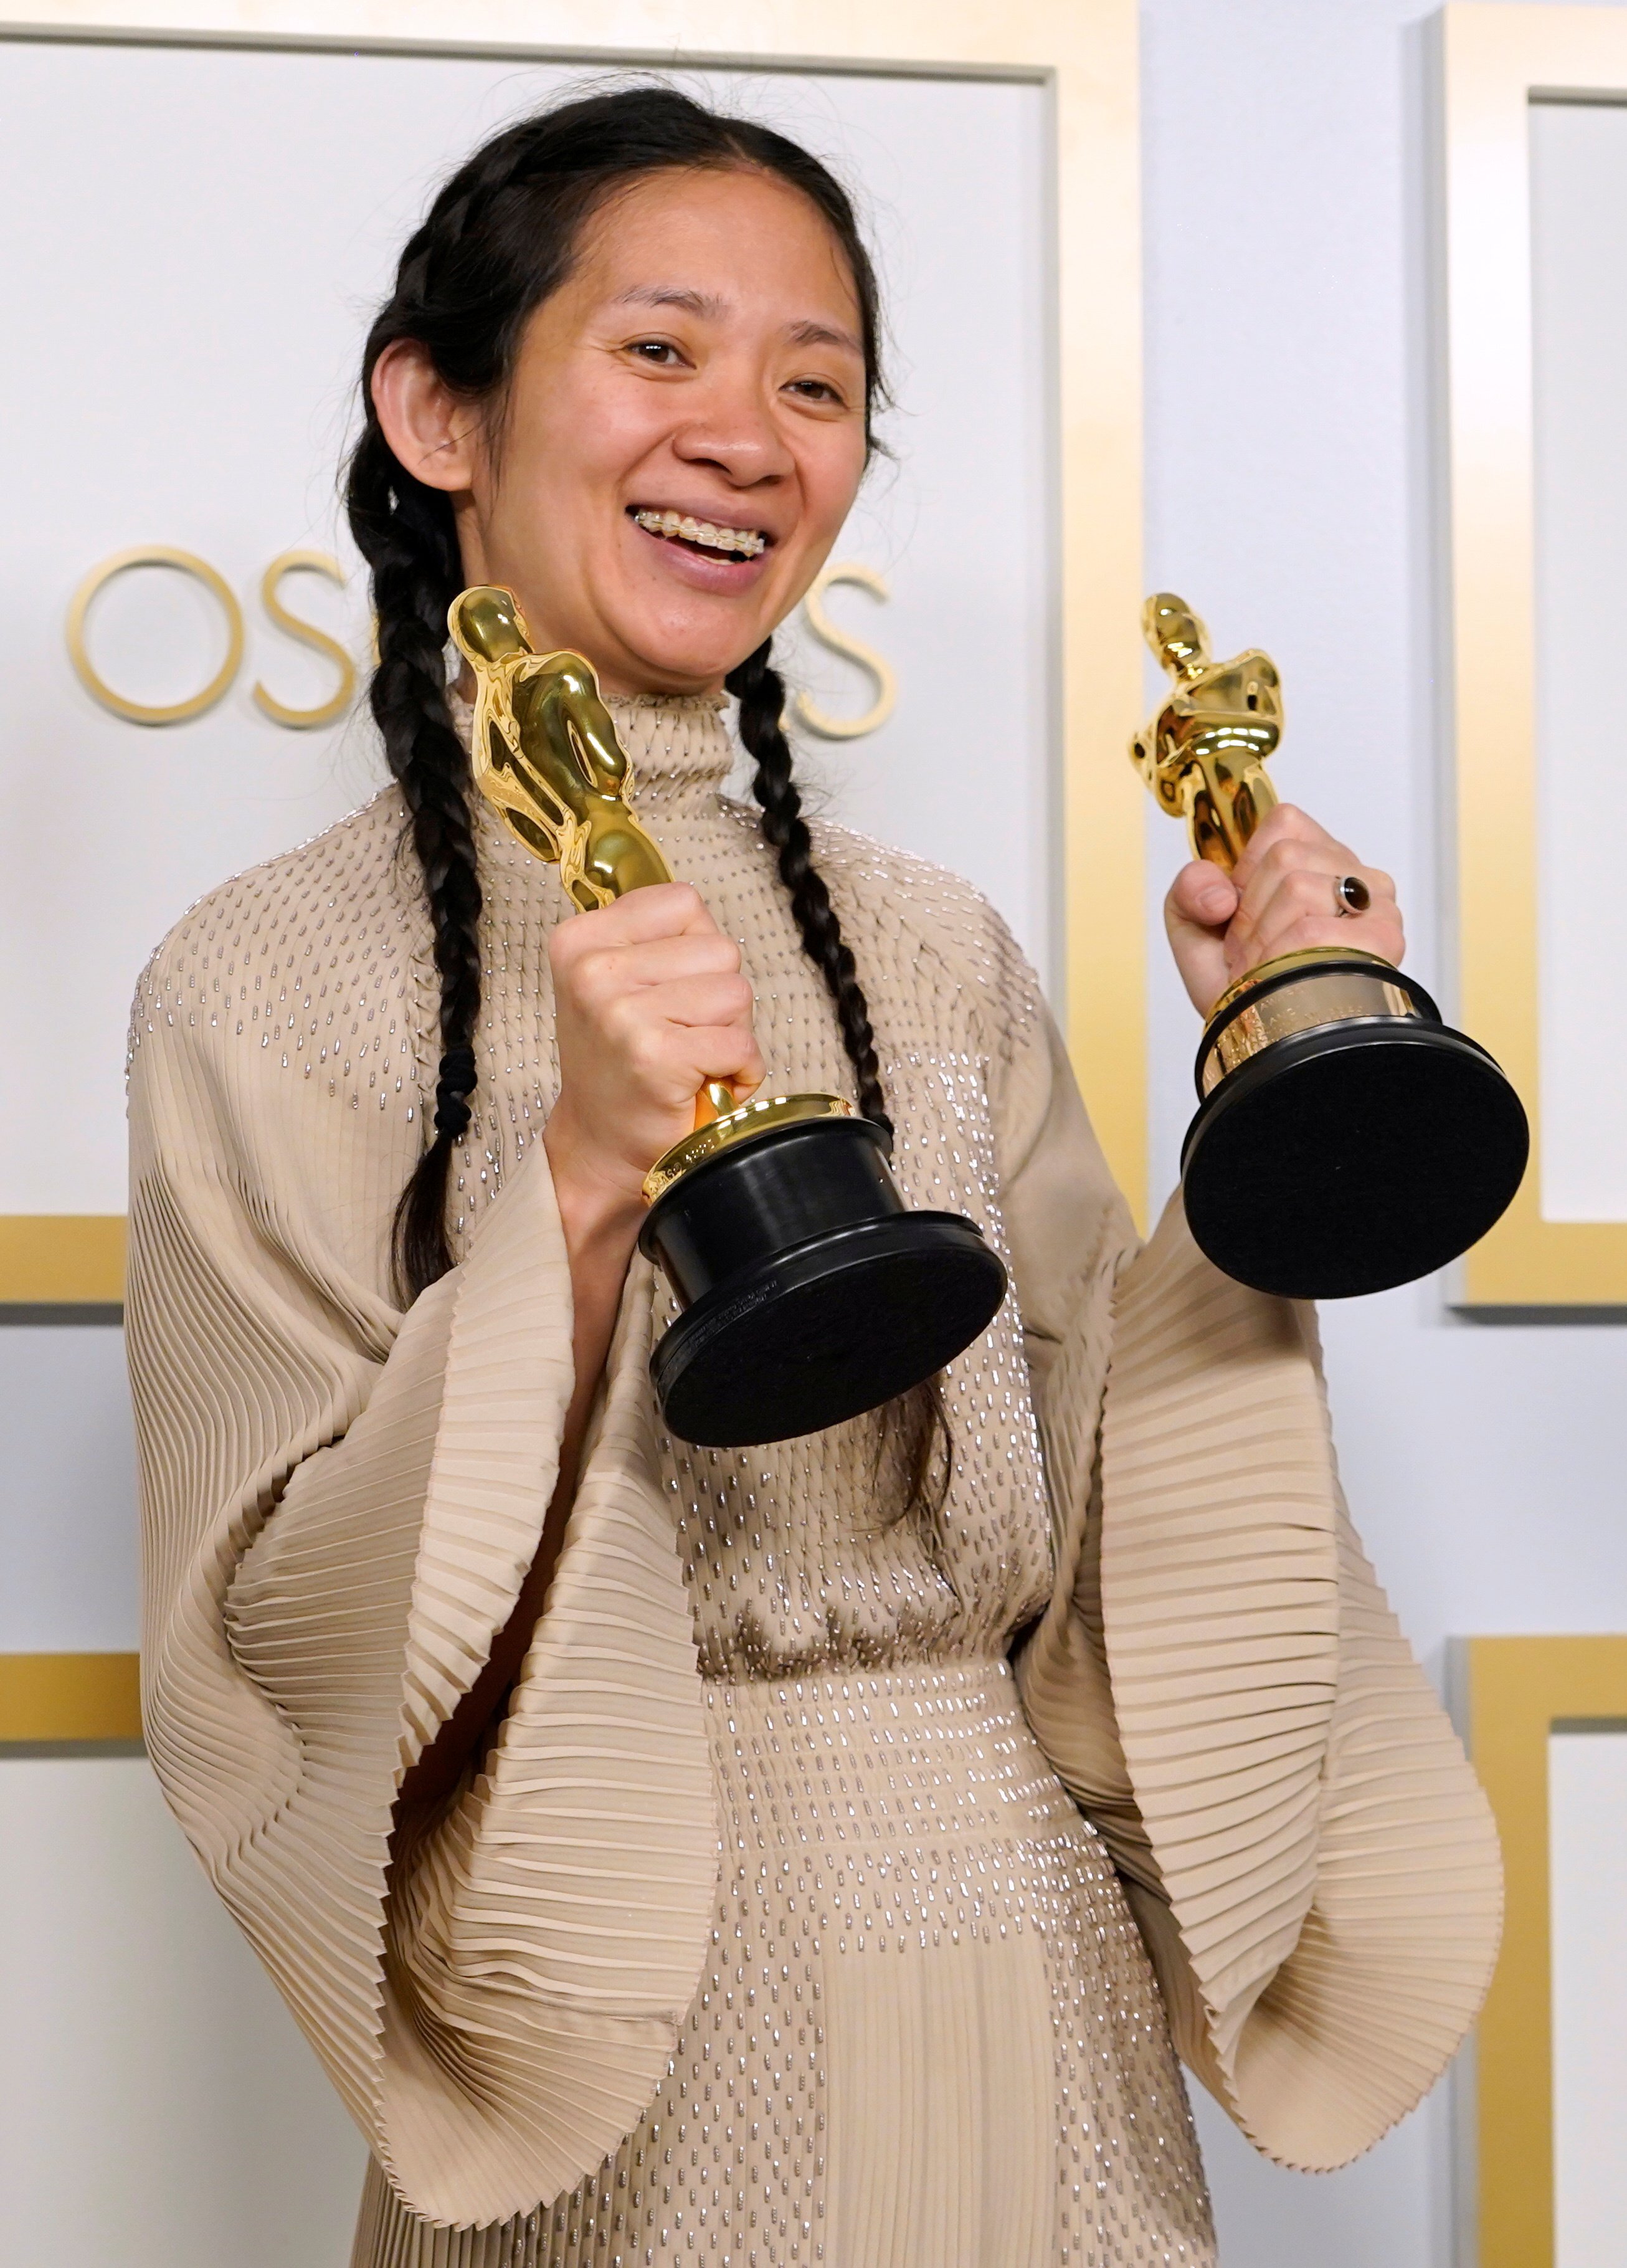 Chloé Zhao shows off her Oscars for best picture and director for Nomadland, but the news went unheralded in China. Photo: AP